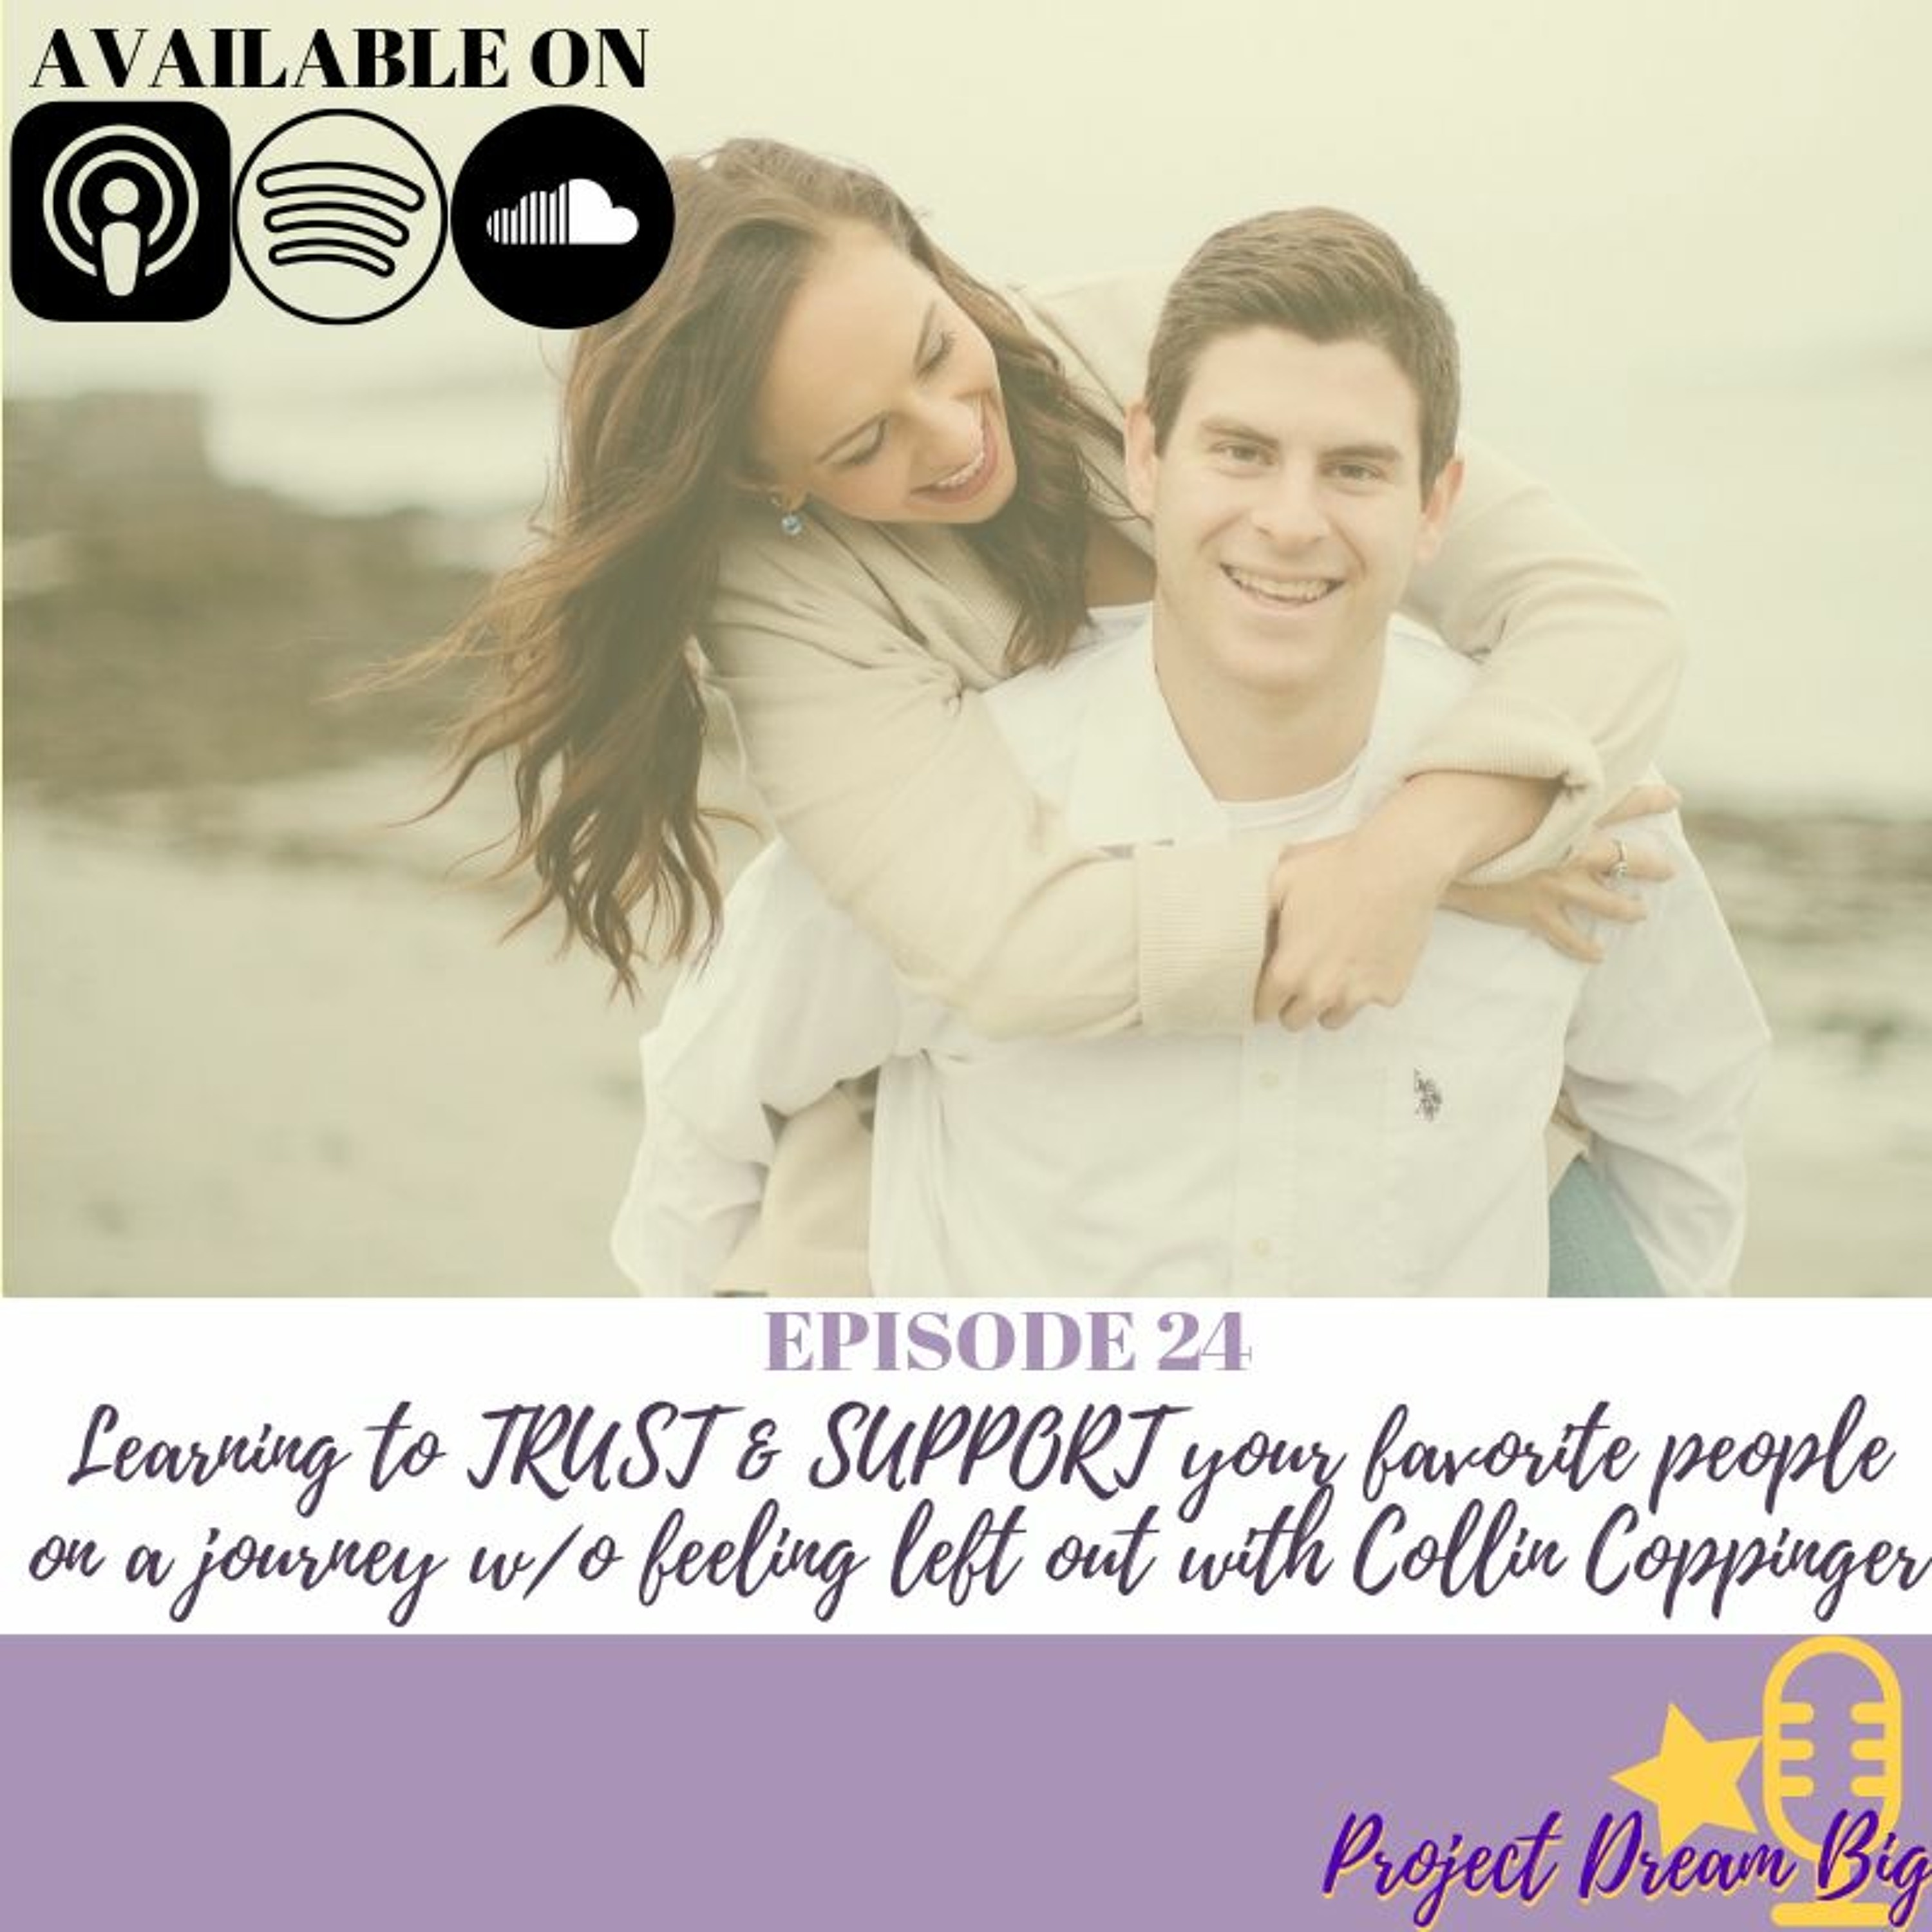 24. Learning to TRUST && SUPPORT your favorite people w/o feeling left out with Collin Coppinger